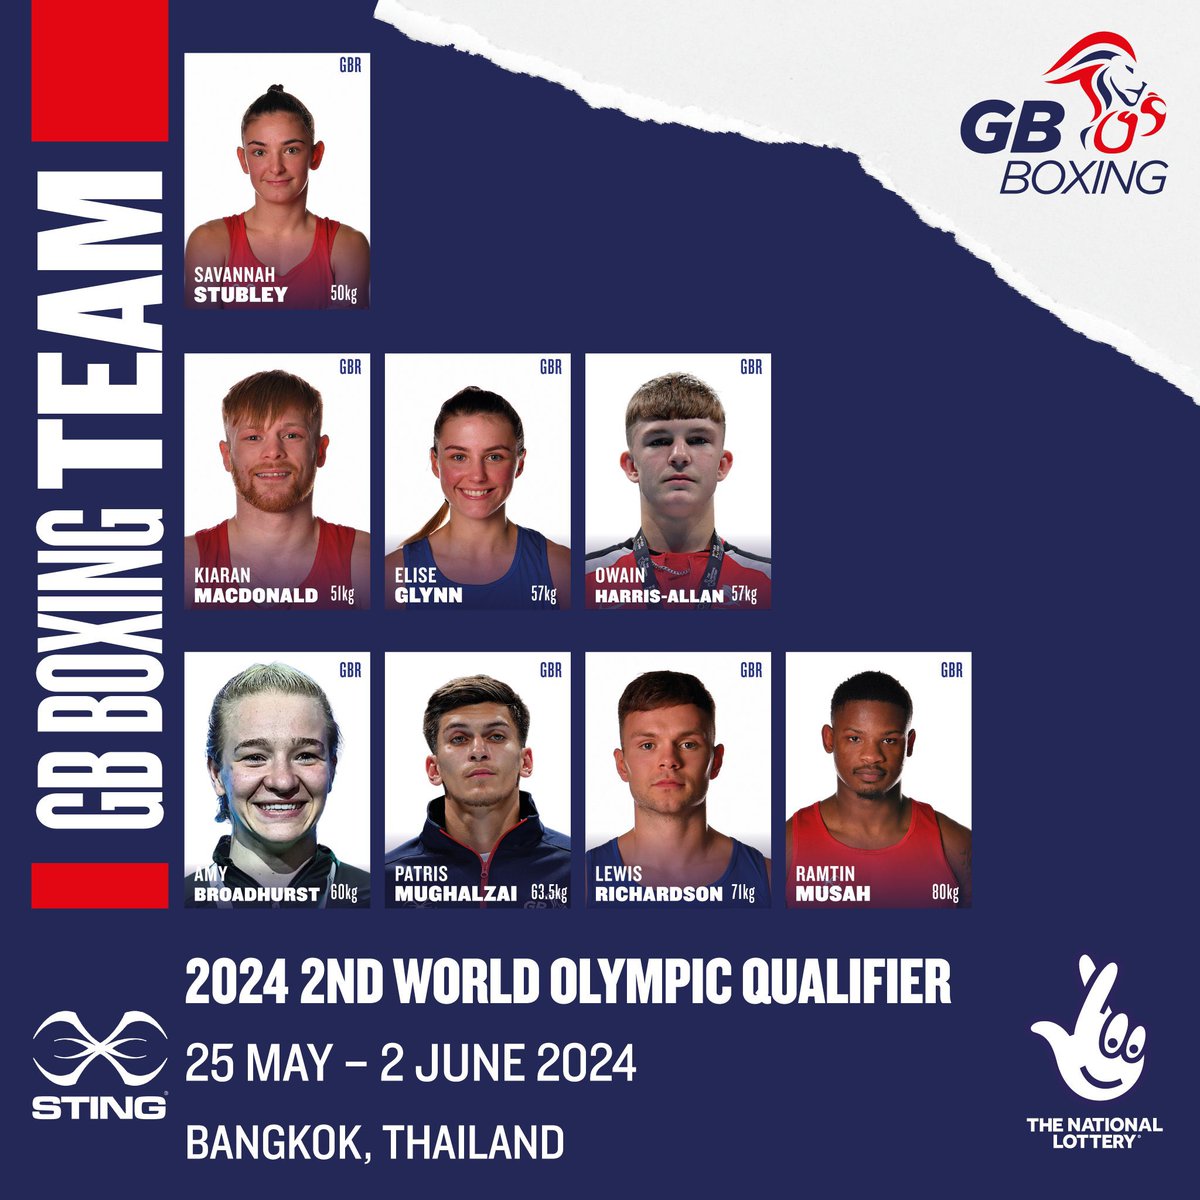 GB Boxing has announced their squad for the final Olympic qualifier in Thailand next month 🥊 The team includes Amy Broadhurst who recently switched allegiances from Ireland to GB. #RoadToParis #AmateurBoxing #BoxingNews